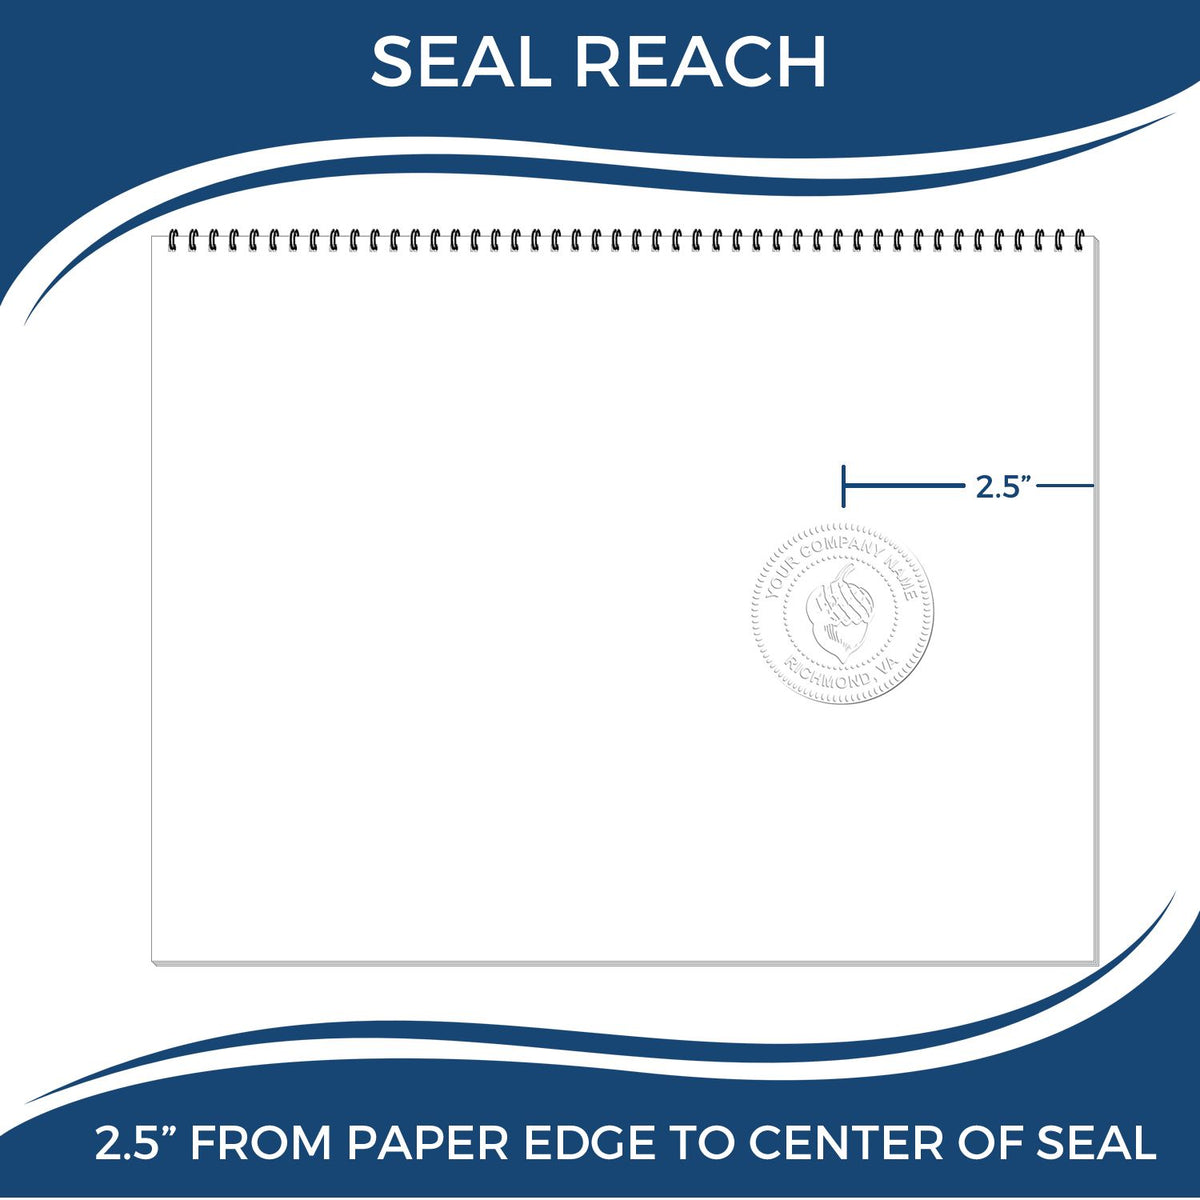 An infographic showing the seal reach which is represented by a ruler and a miniature seal image of the Long Reach Iowa PE Seal